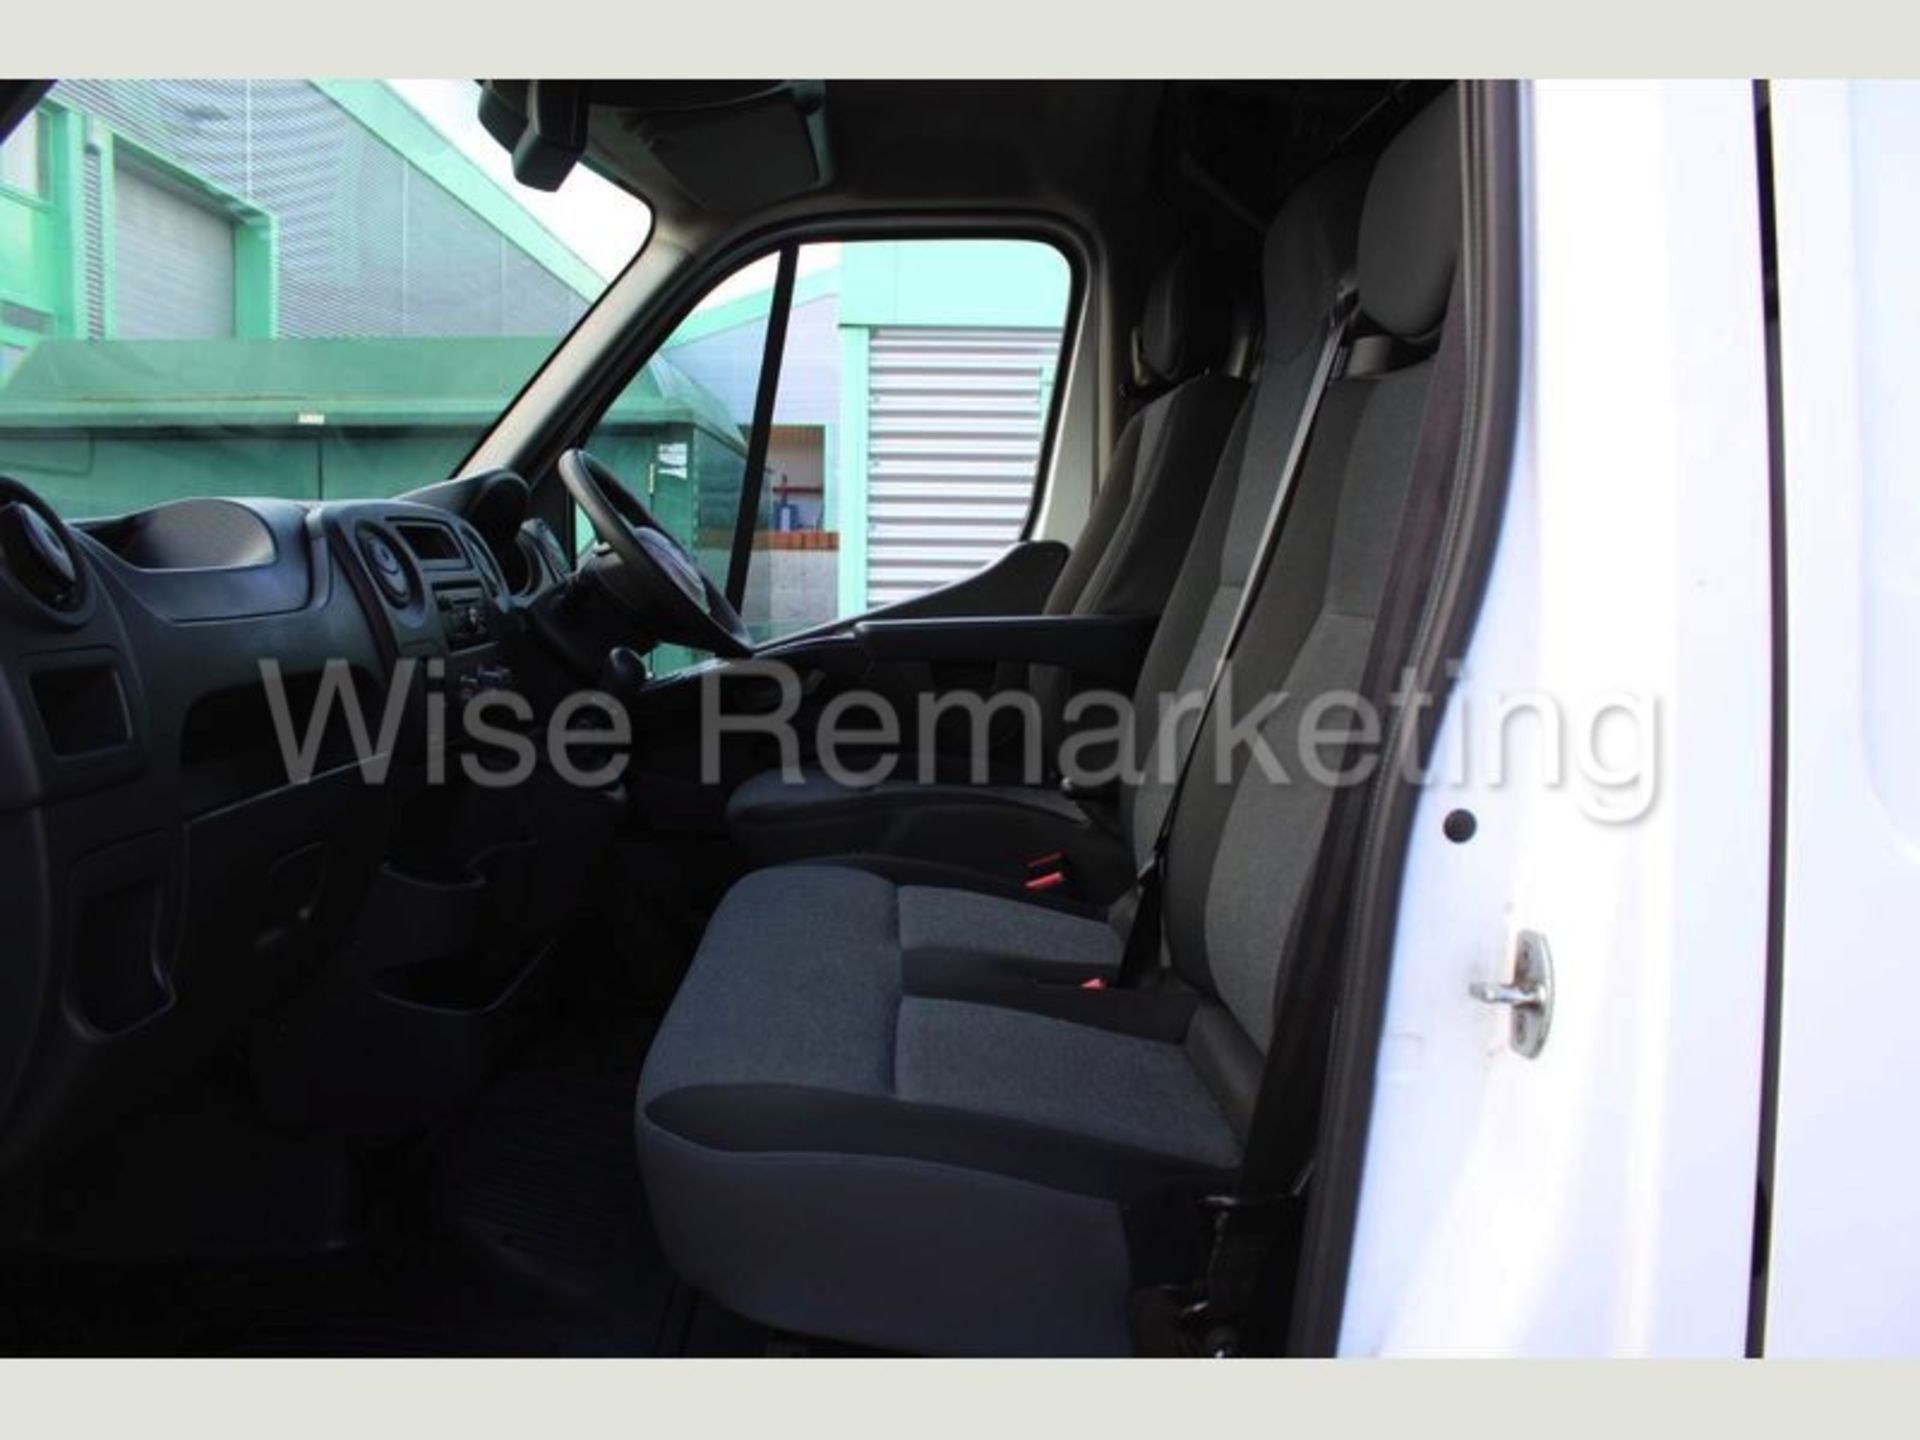 Renault Master L3H3 *LWB - Super Roof* (2018 ~ Euro 6 Compliant) Air Con - Electric Pack (1 Owner) - Image 9 of 11